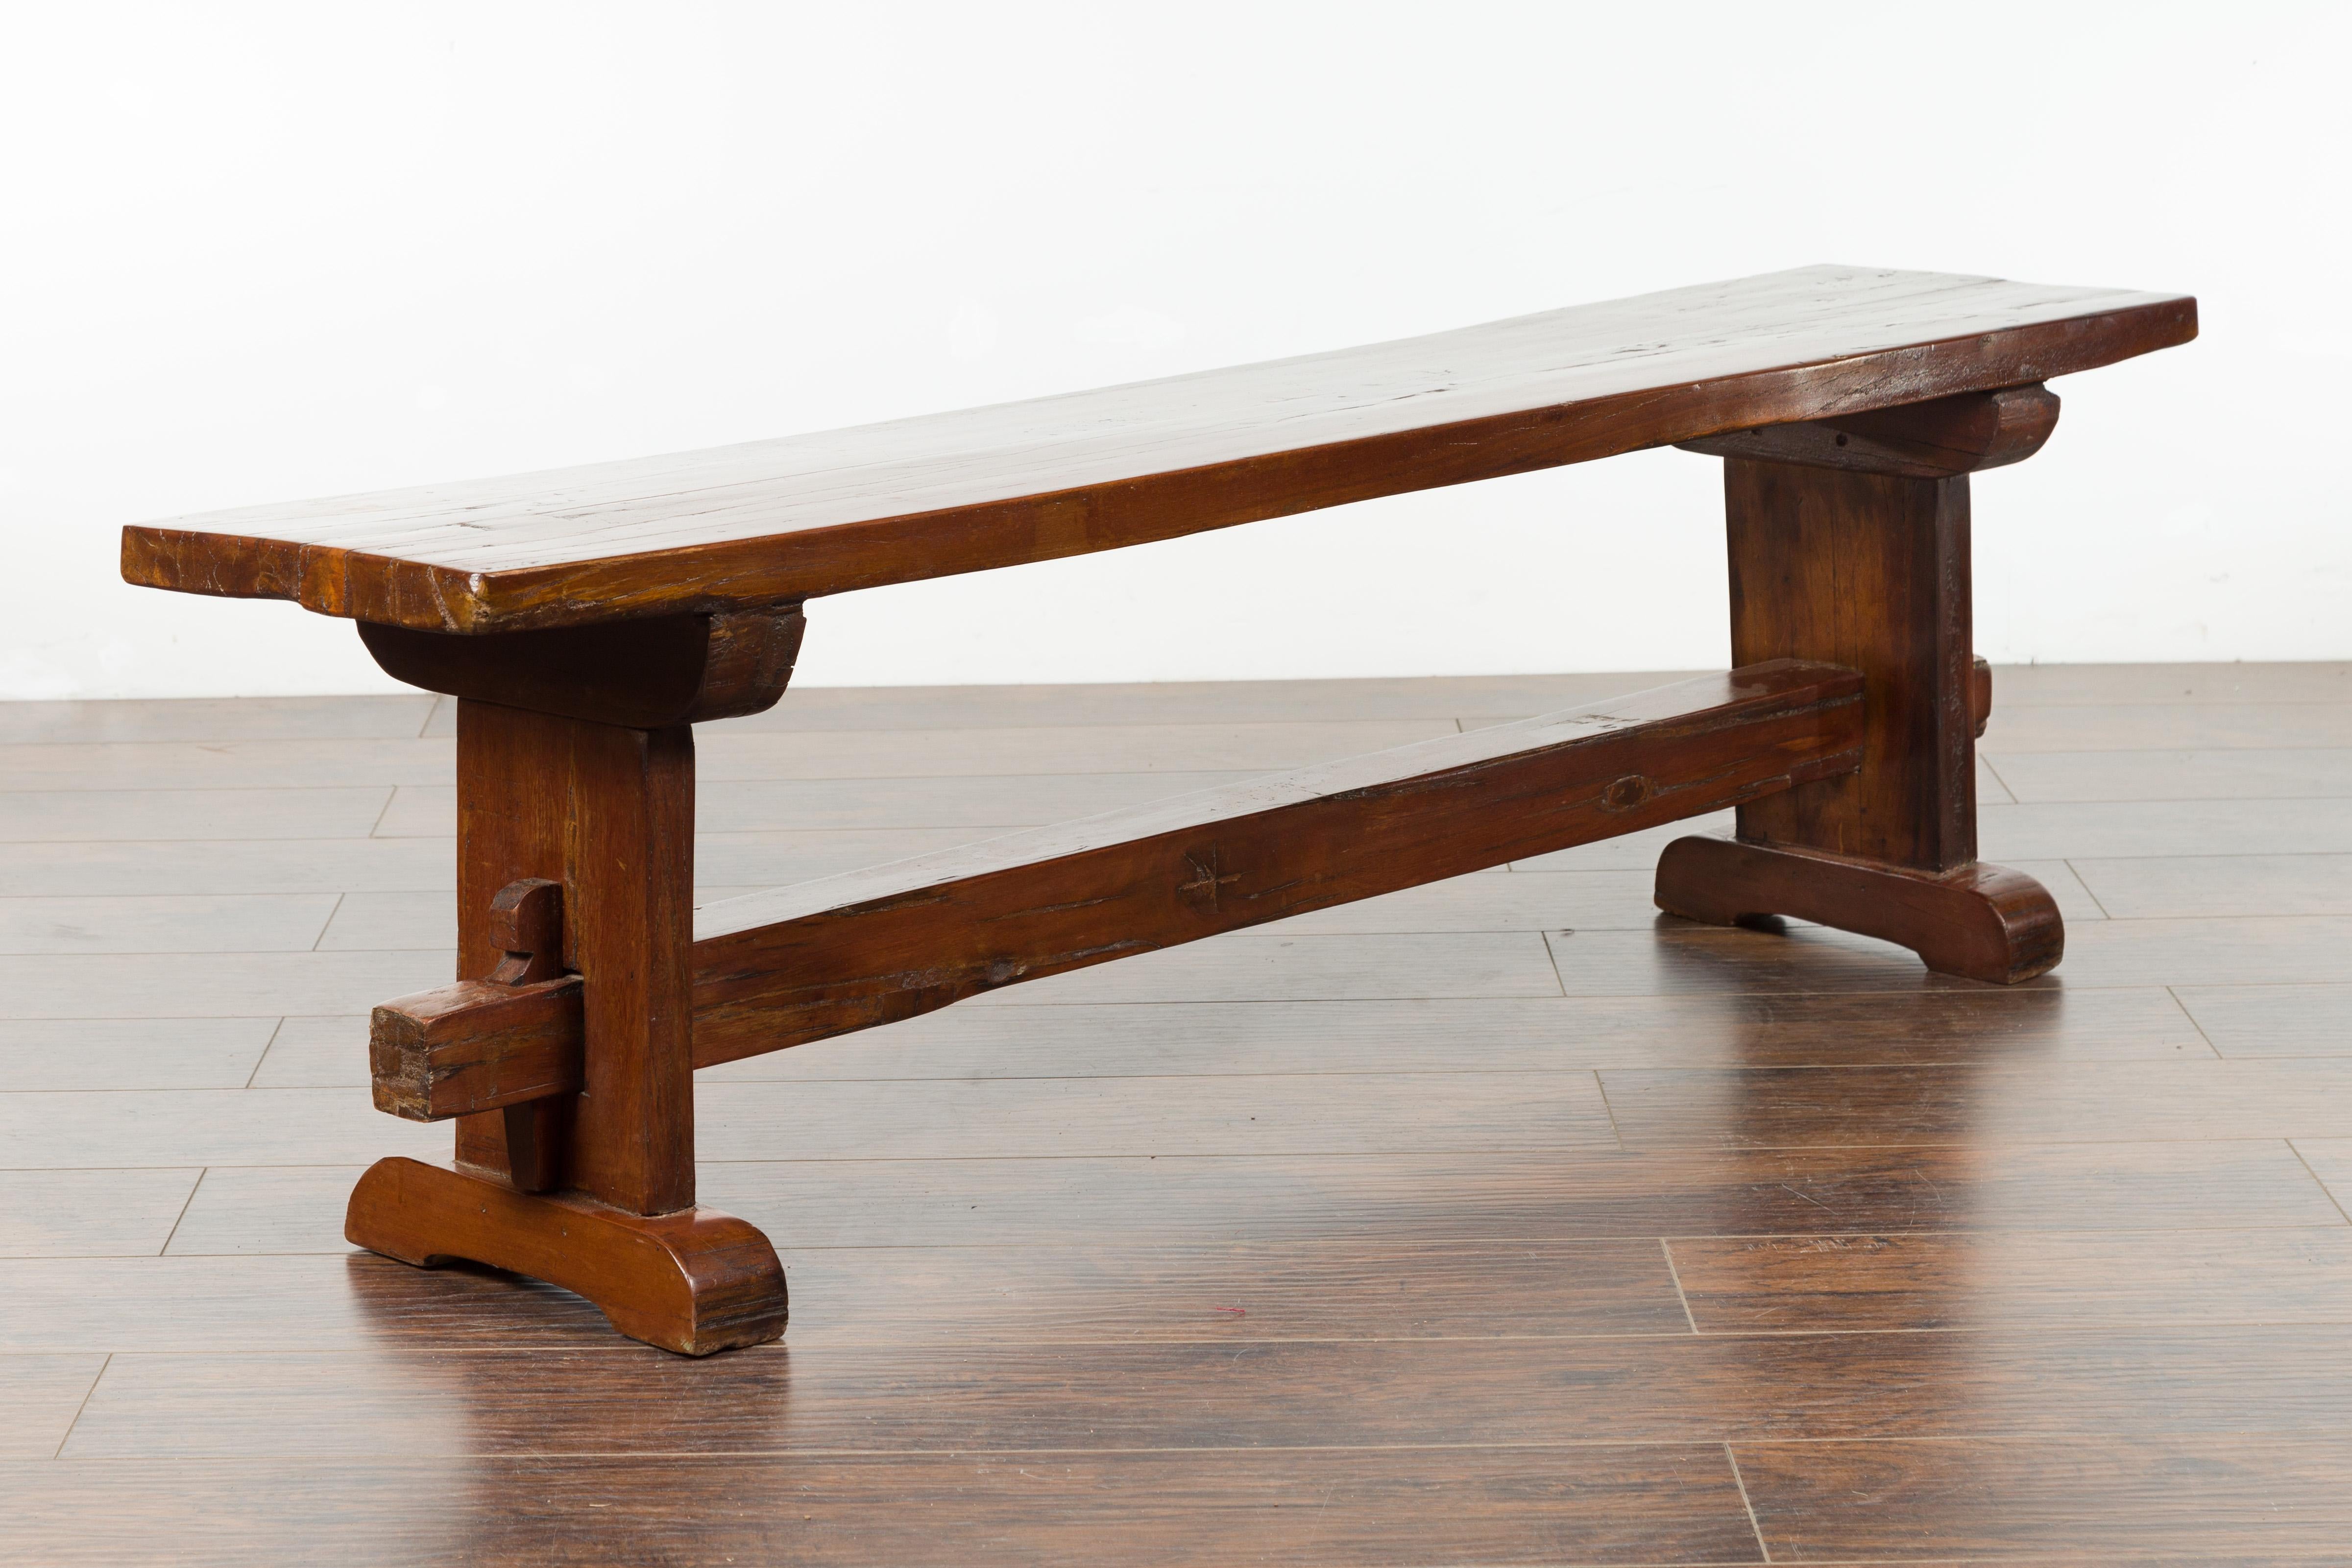 Italian Rustic Walnut Bench with Trestle Base from the Early 19th Century 4